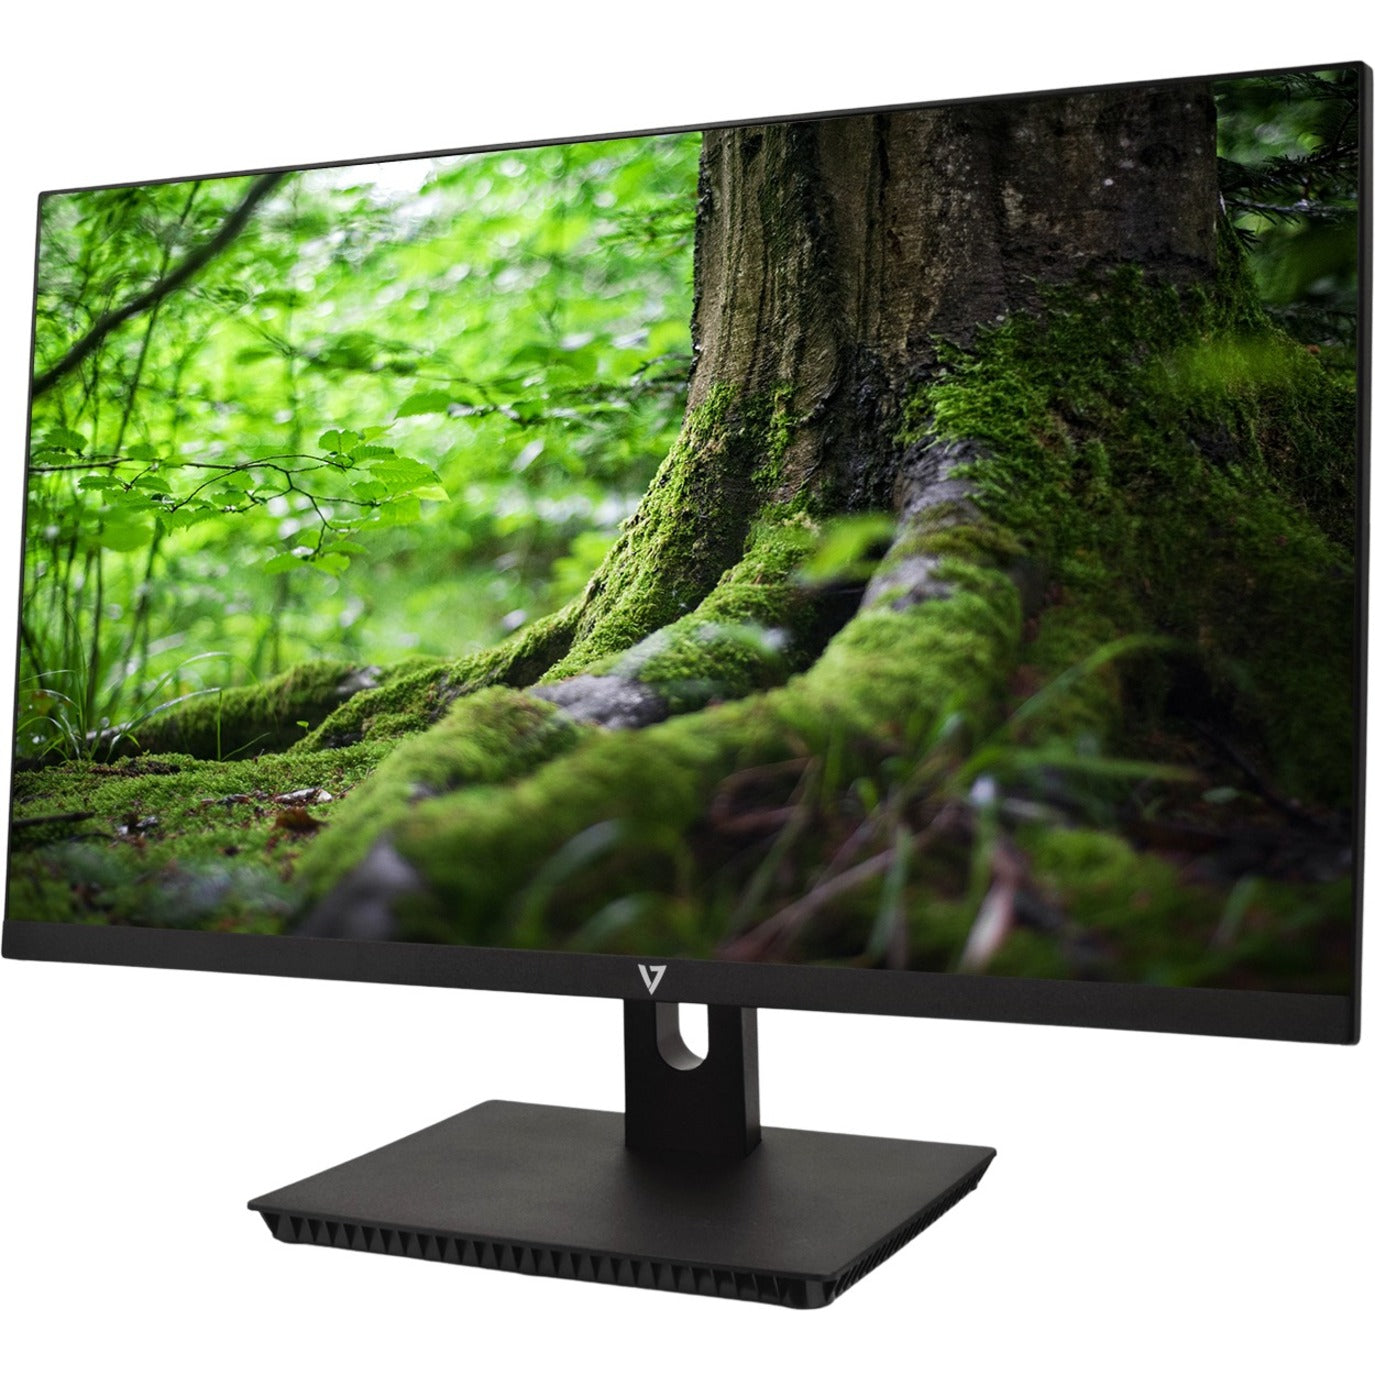 V7 L238IPS-N 23.8 Full HD LCD Monitor - Black, Wide Viewing Angle, 1920x1080 Resolution, 60Hz Refresh Rate